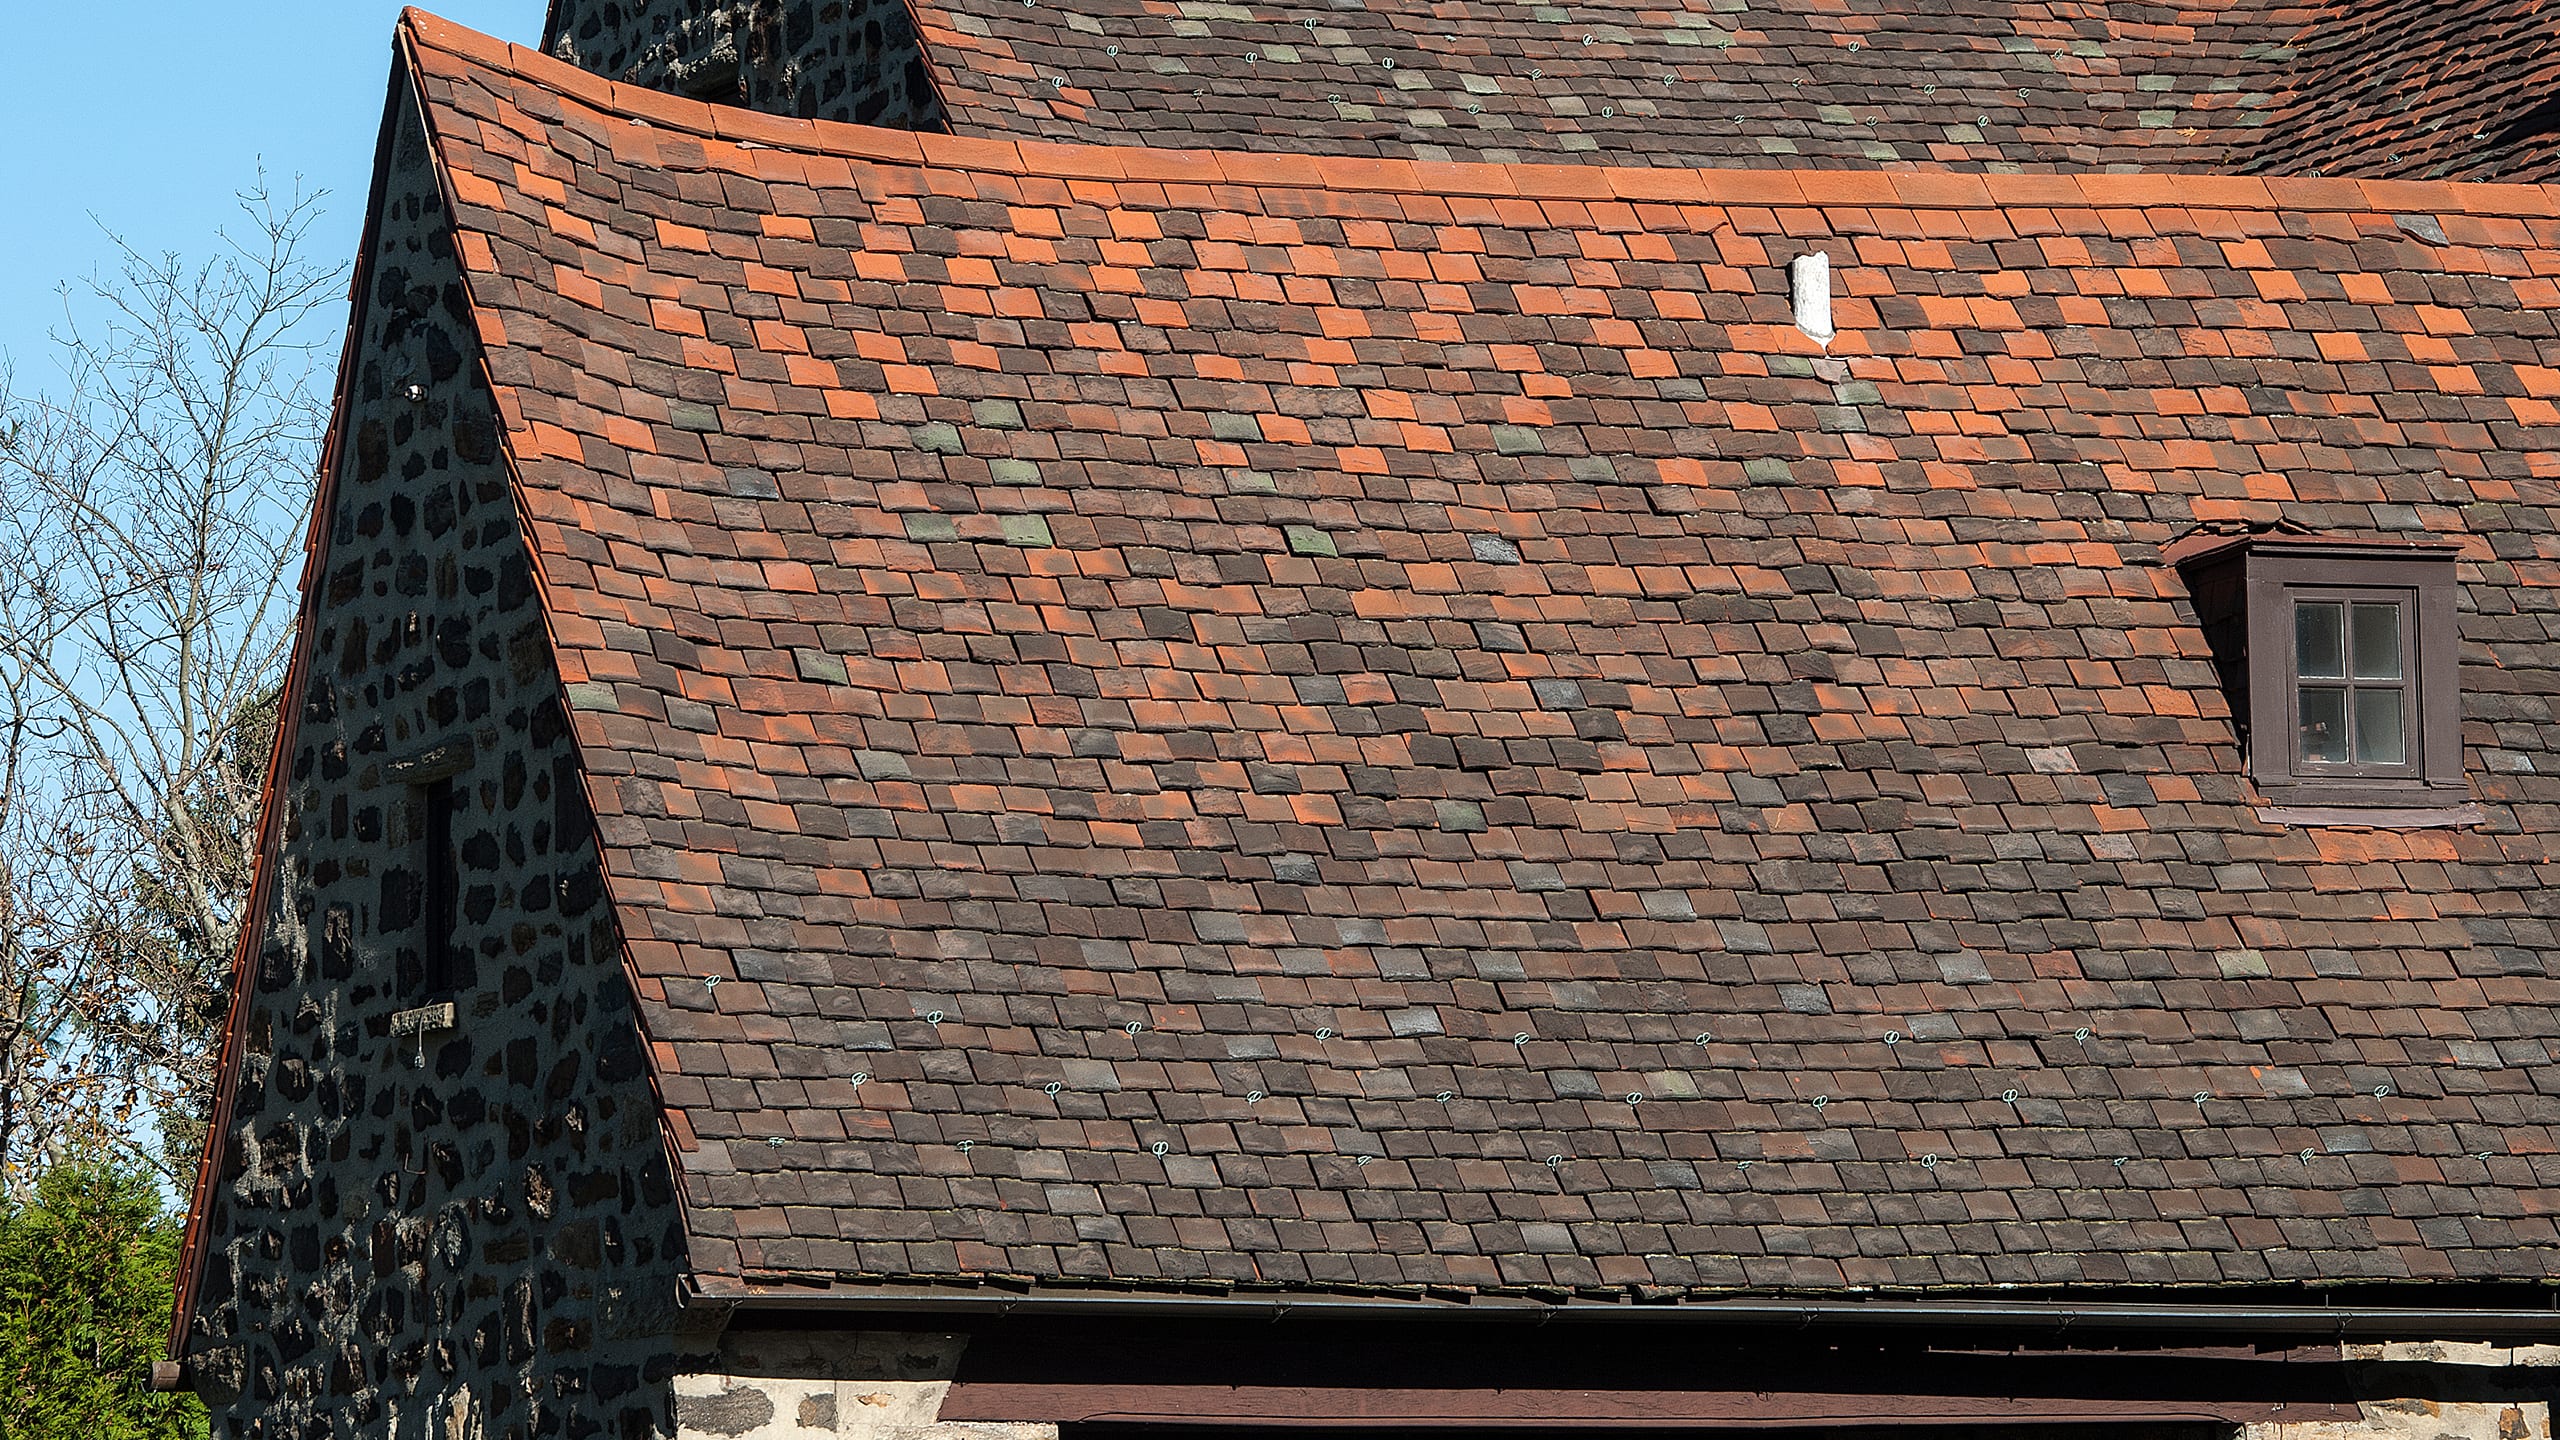 Aronimink Golf Club Featuring Ludowici Clay Roof Tile Shingles